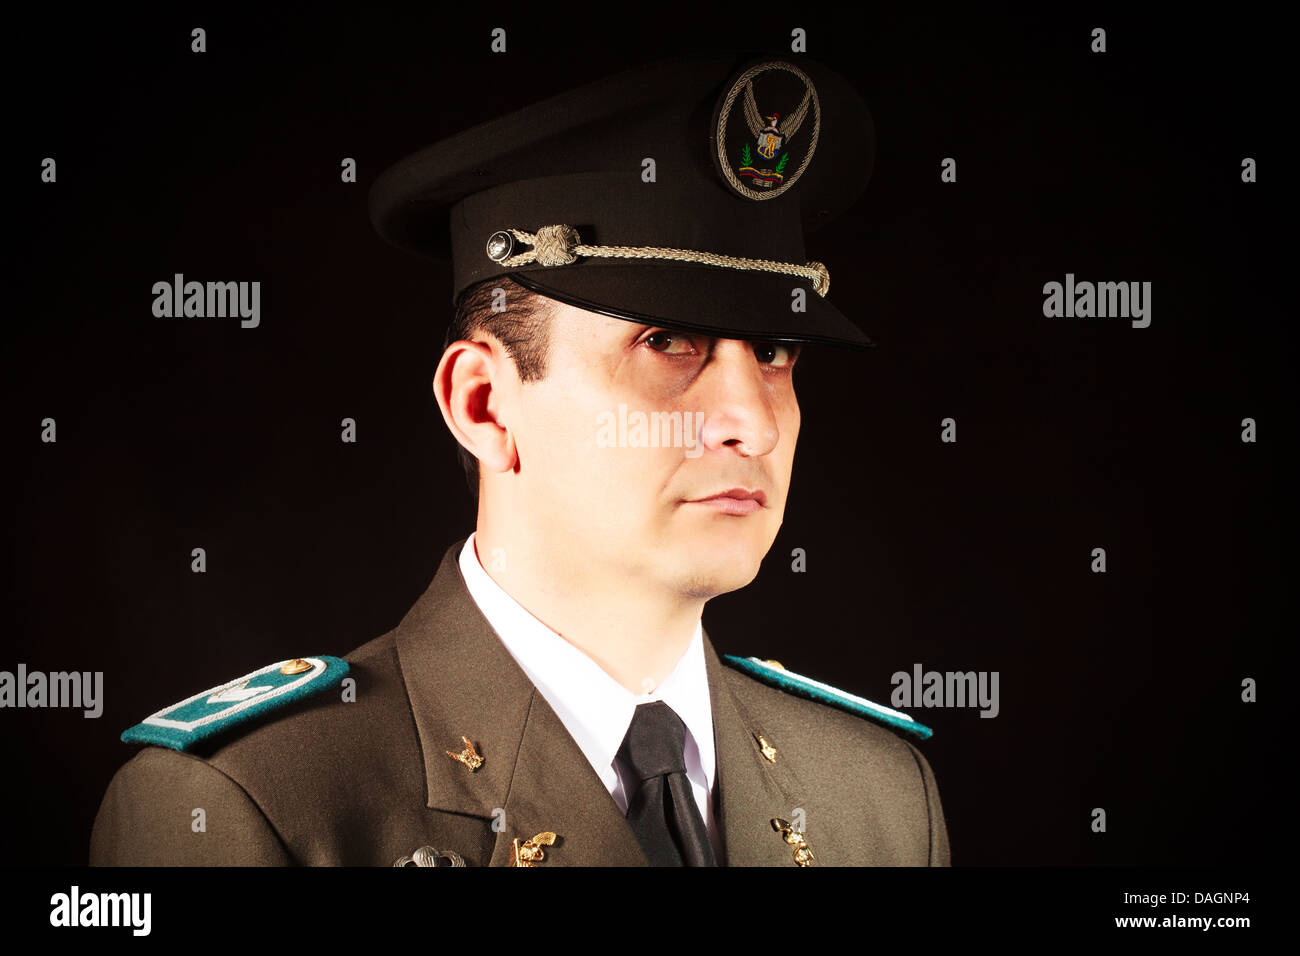 Ecuadorian Police Official Dressed Up In Formal Uniform Stock Photo